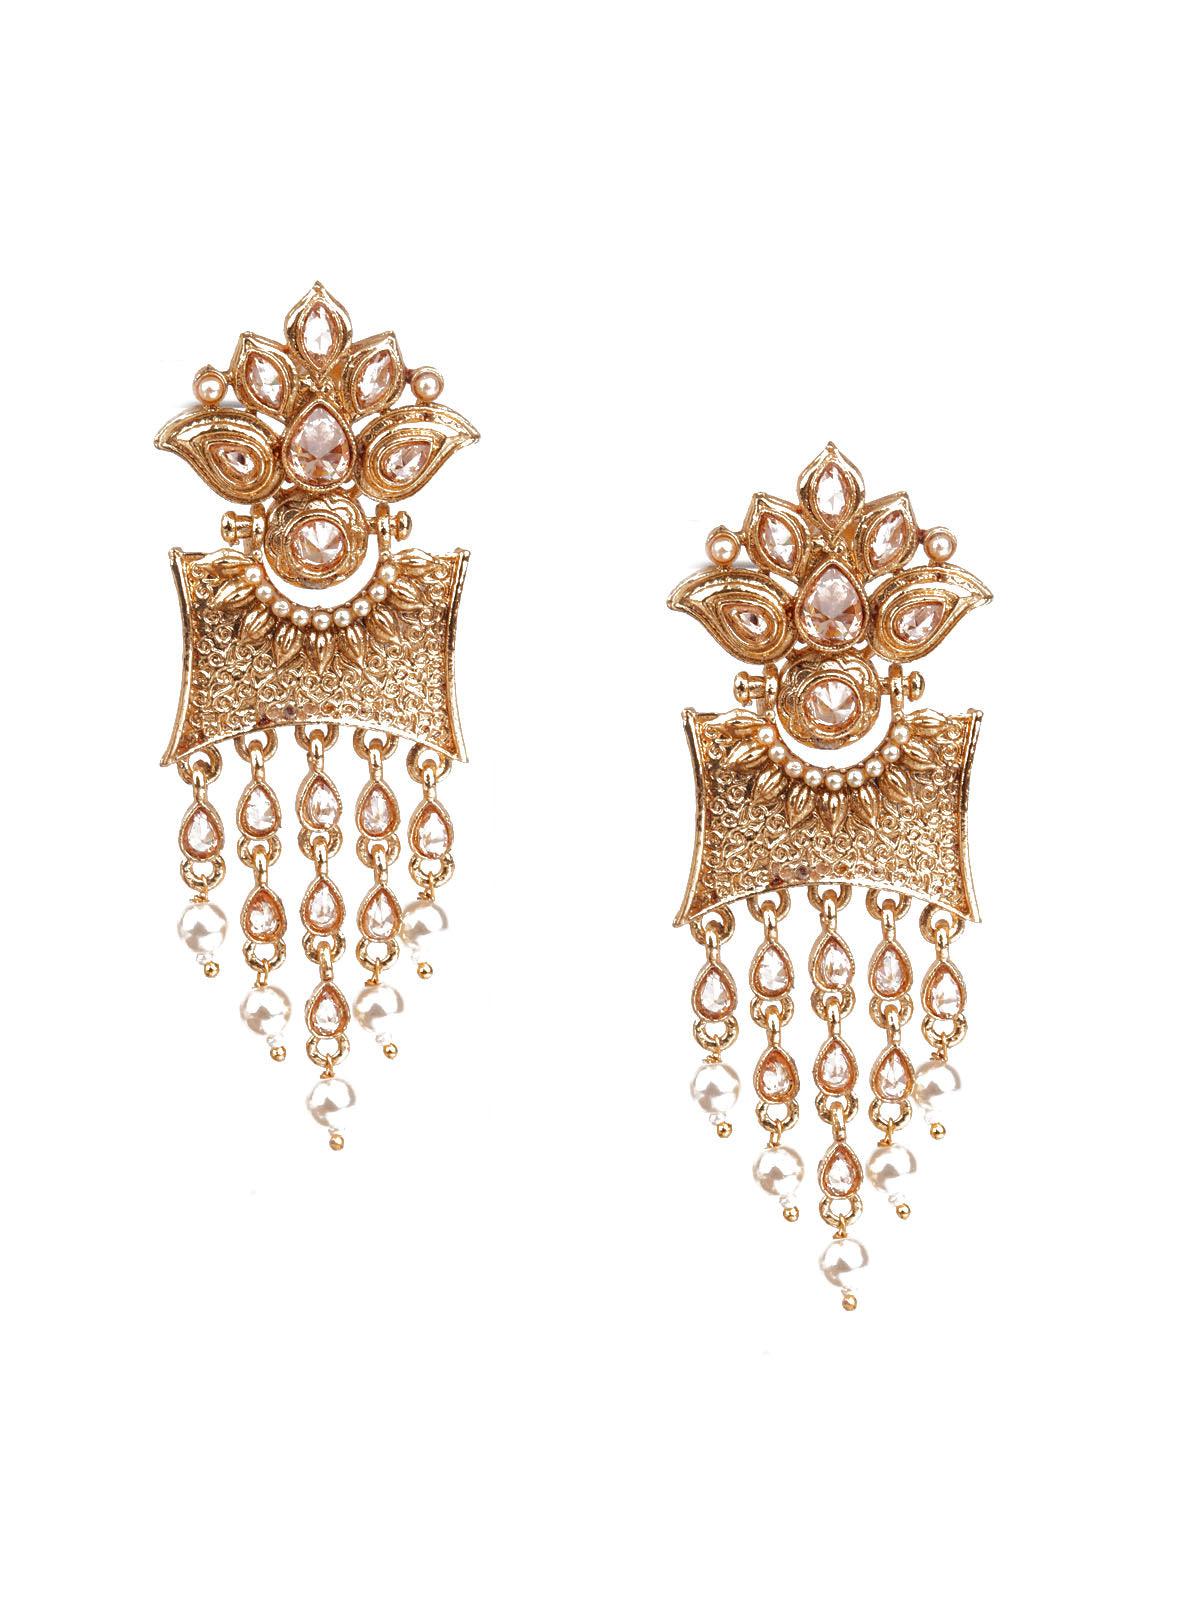 TRADITIONAL GOLD AND WHITE DANGLE EARRINGS - Odette